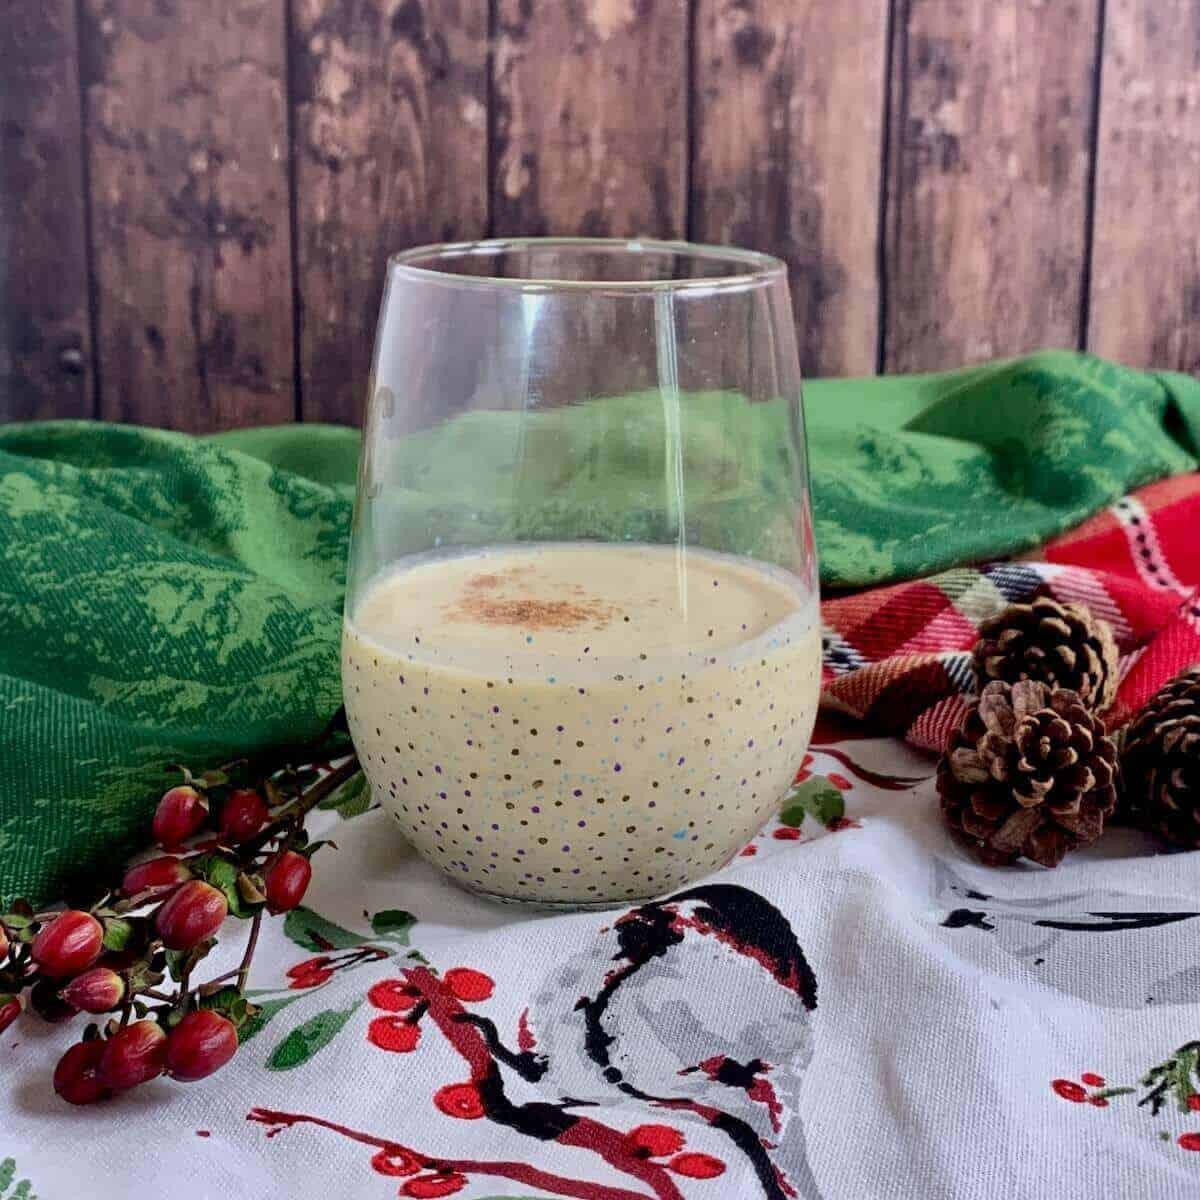 Glass of eggnog with pinecones on top of festive towels.